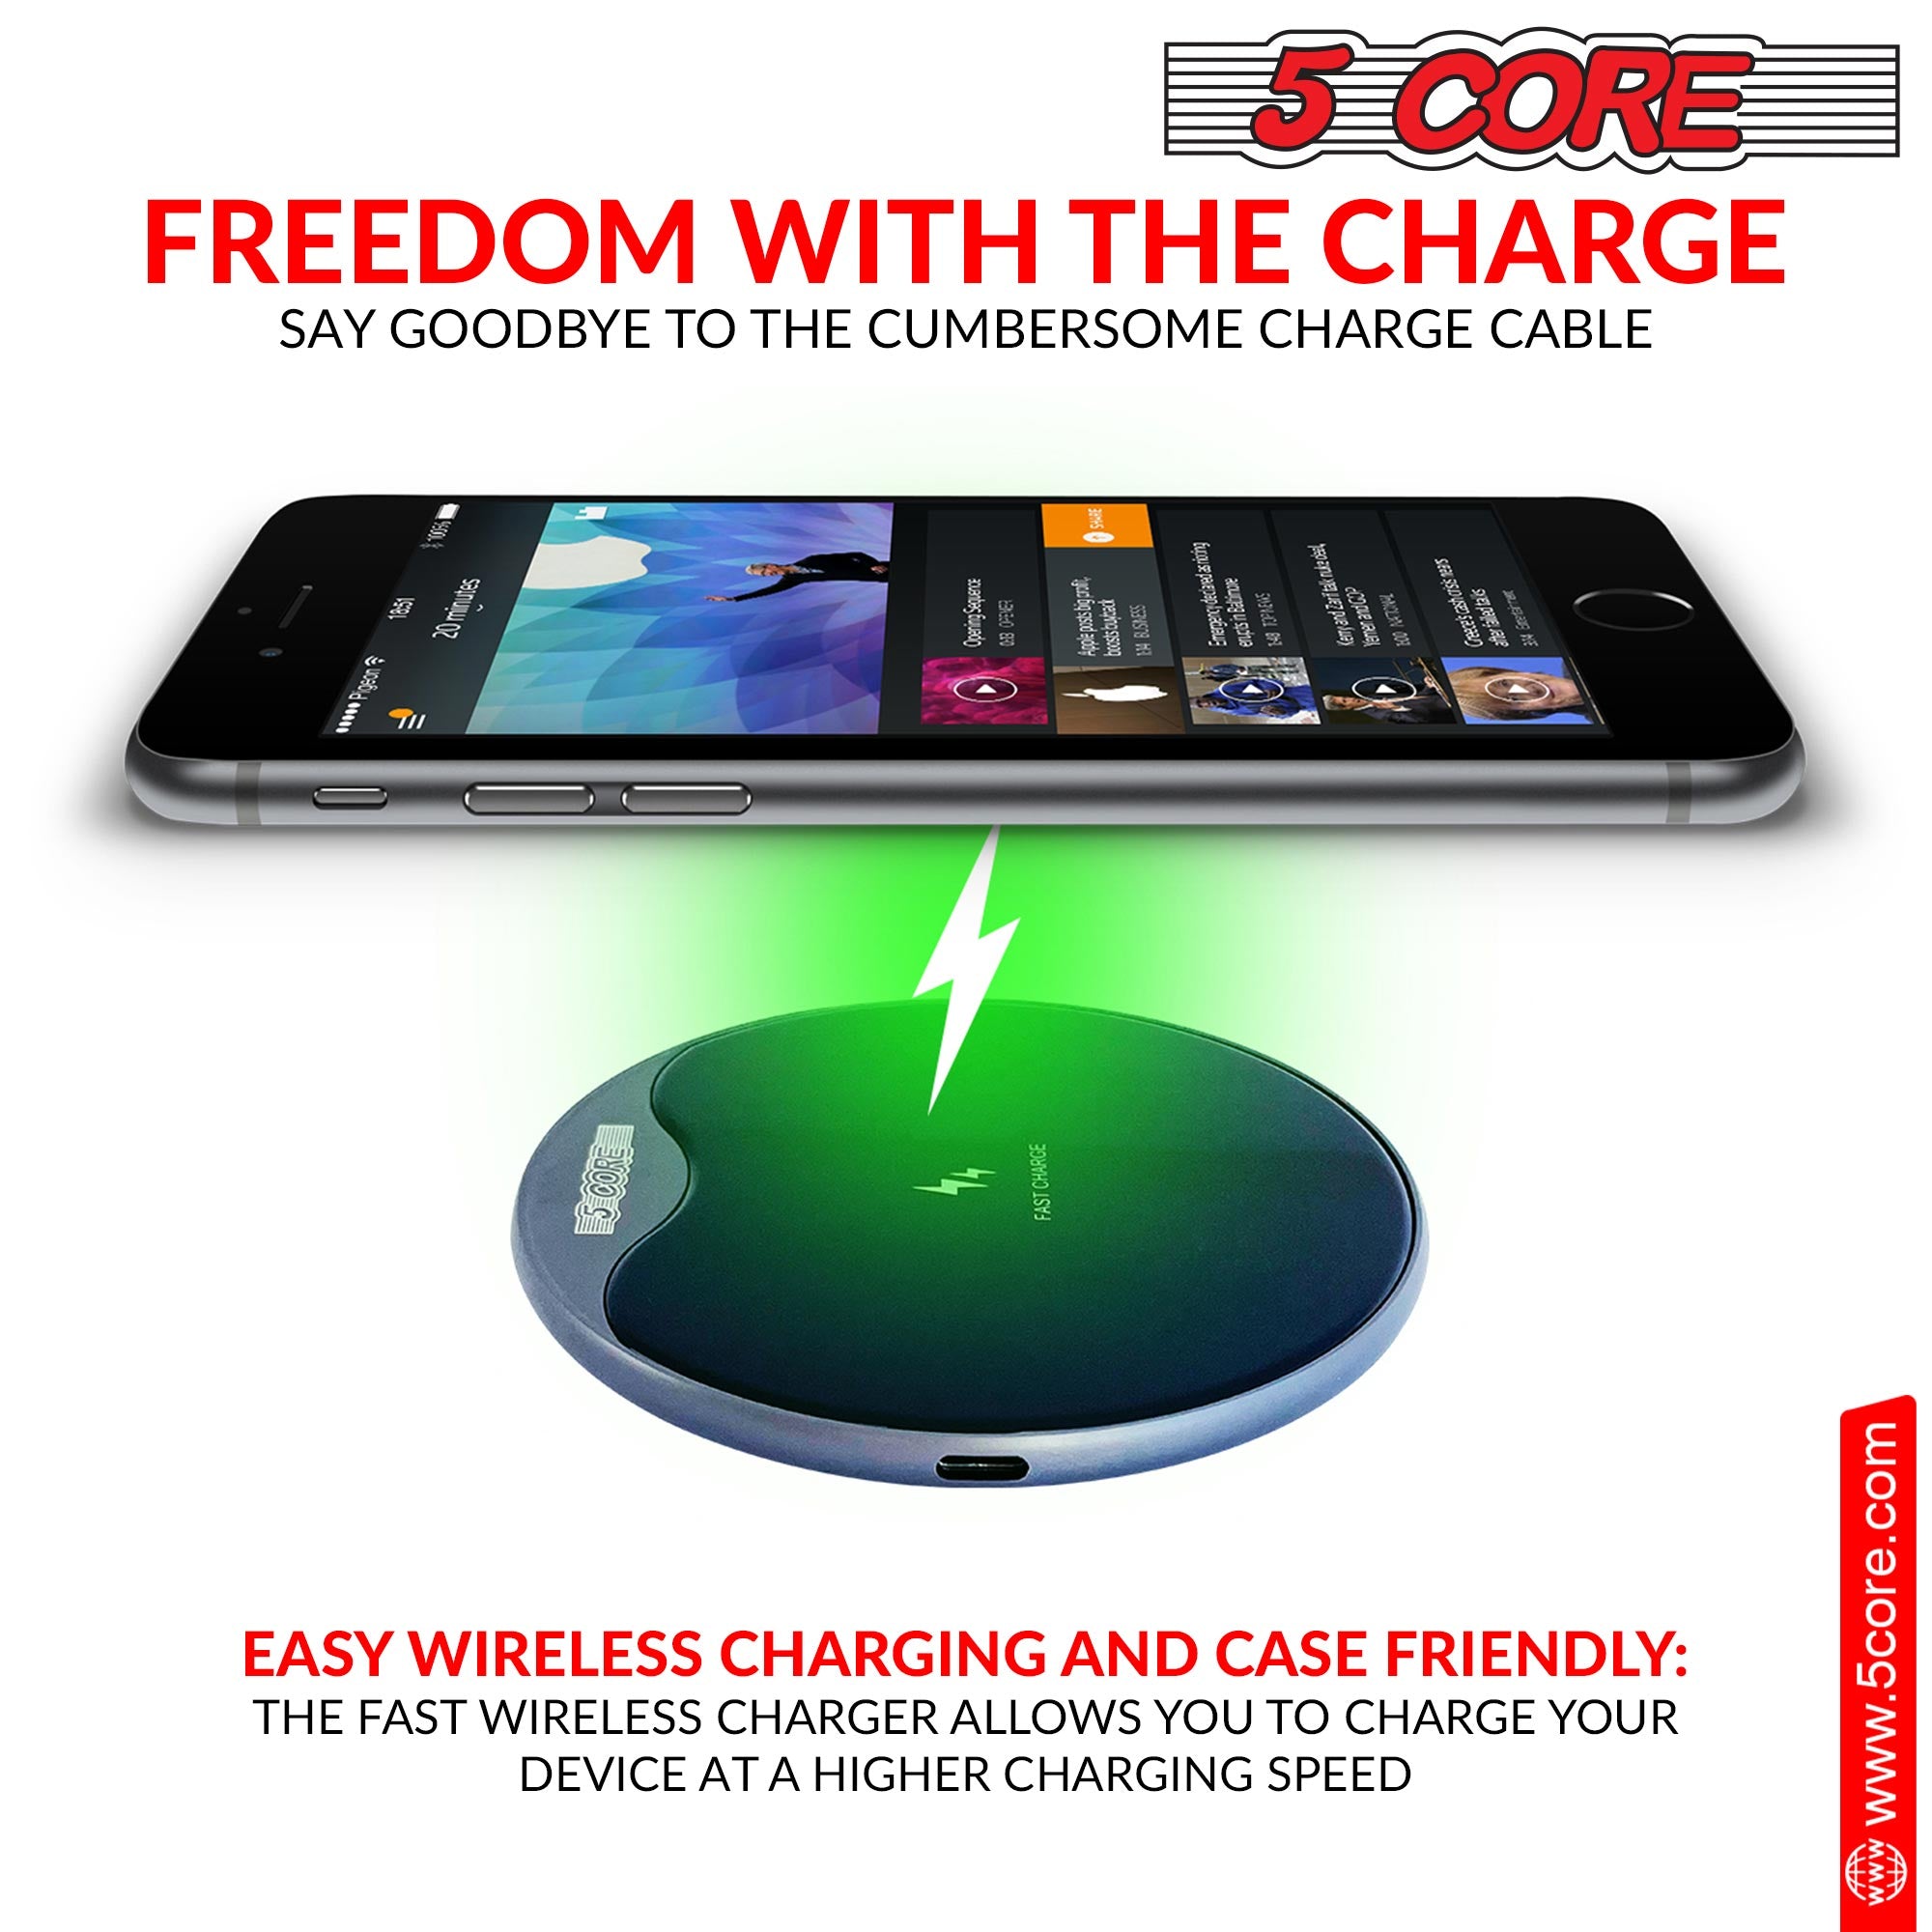 easy wireless charging and case friendly